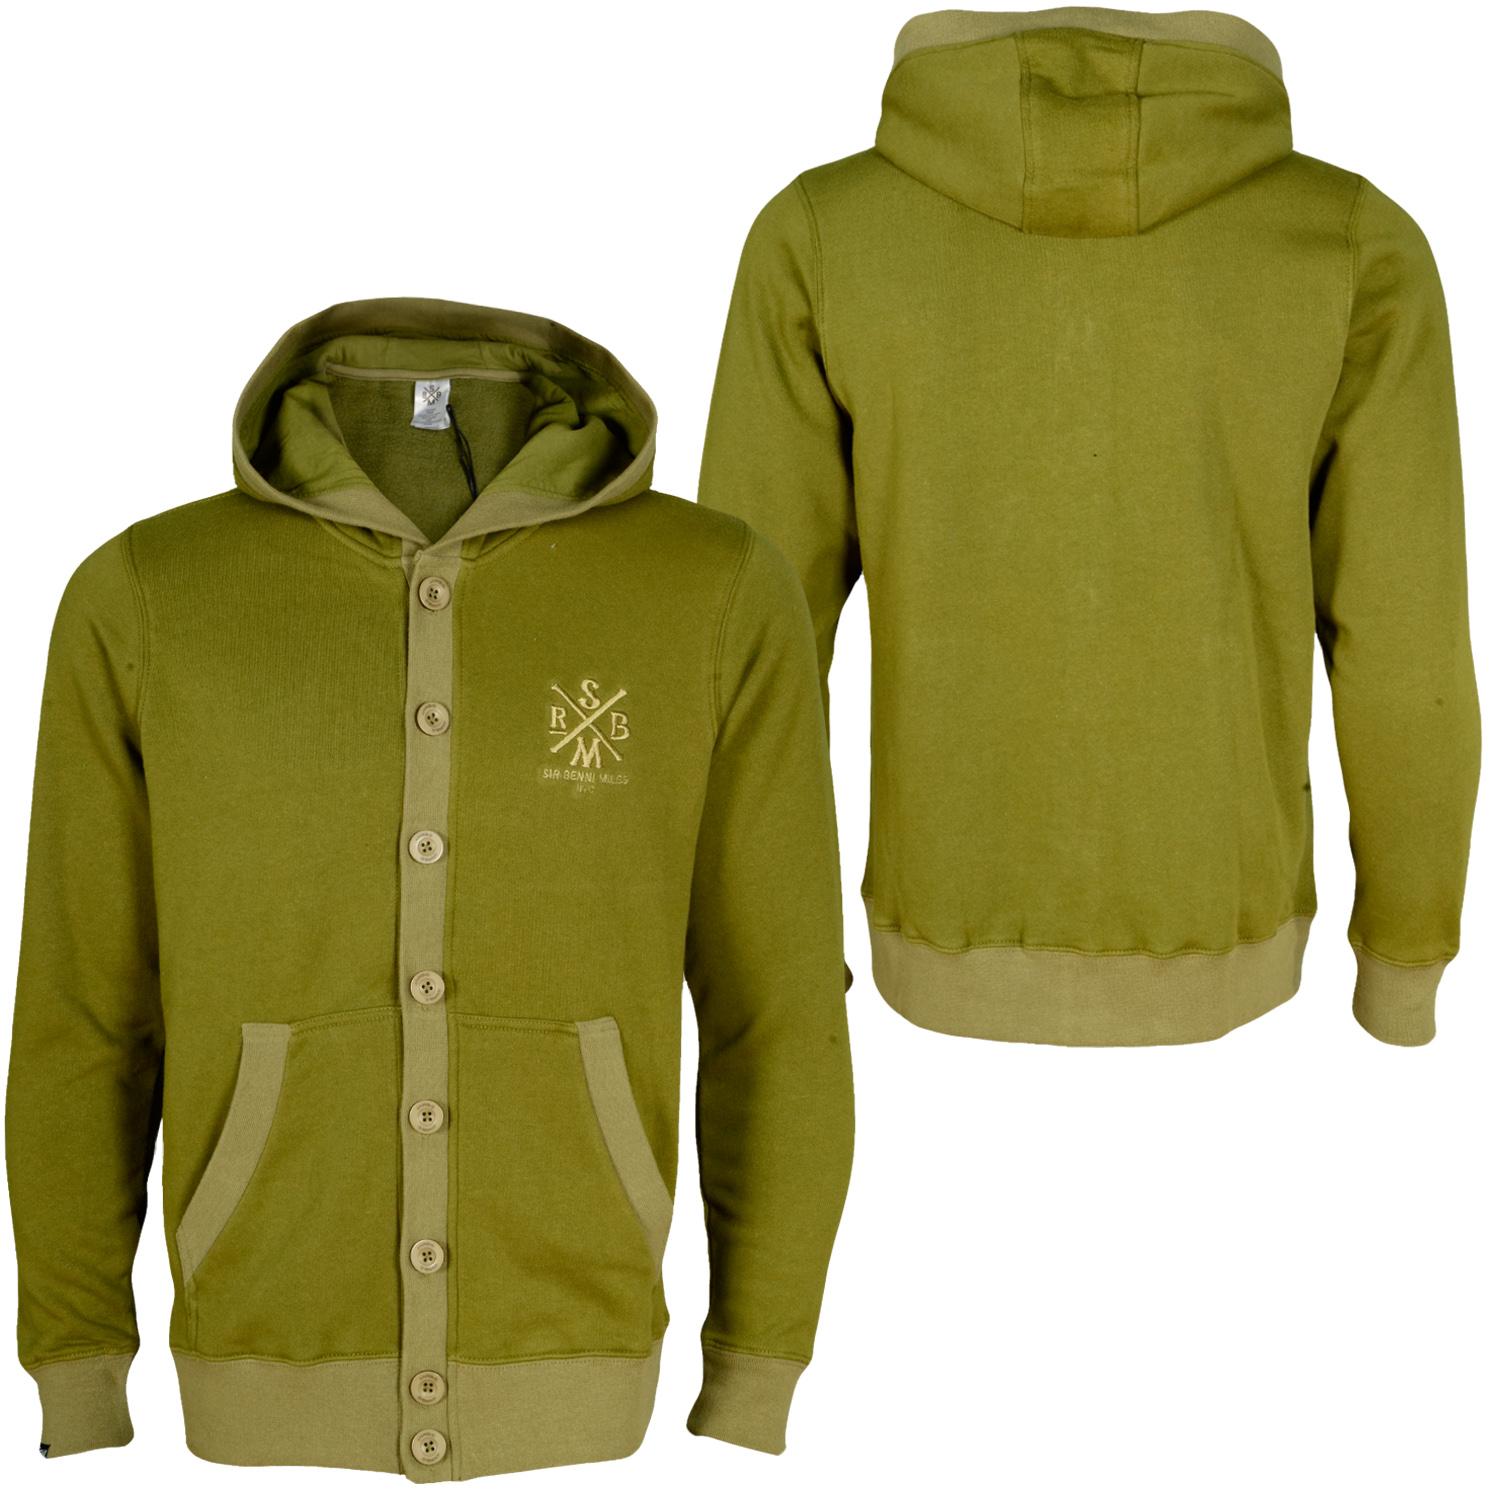 Foto Sir Benni Miles Larry Hooded Hombres Cardigan Aceituna foto 421825